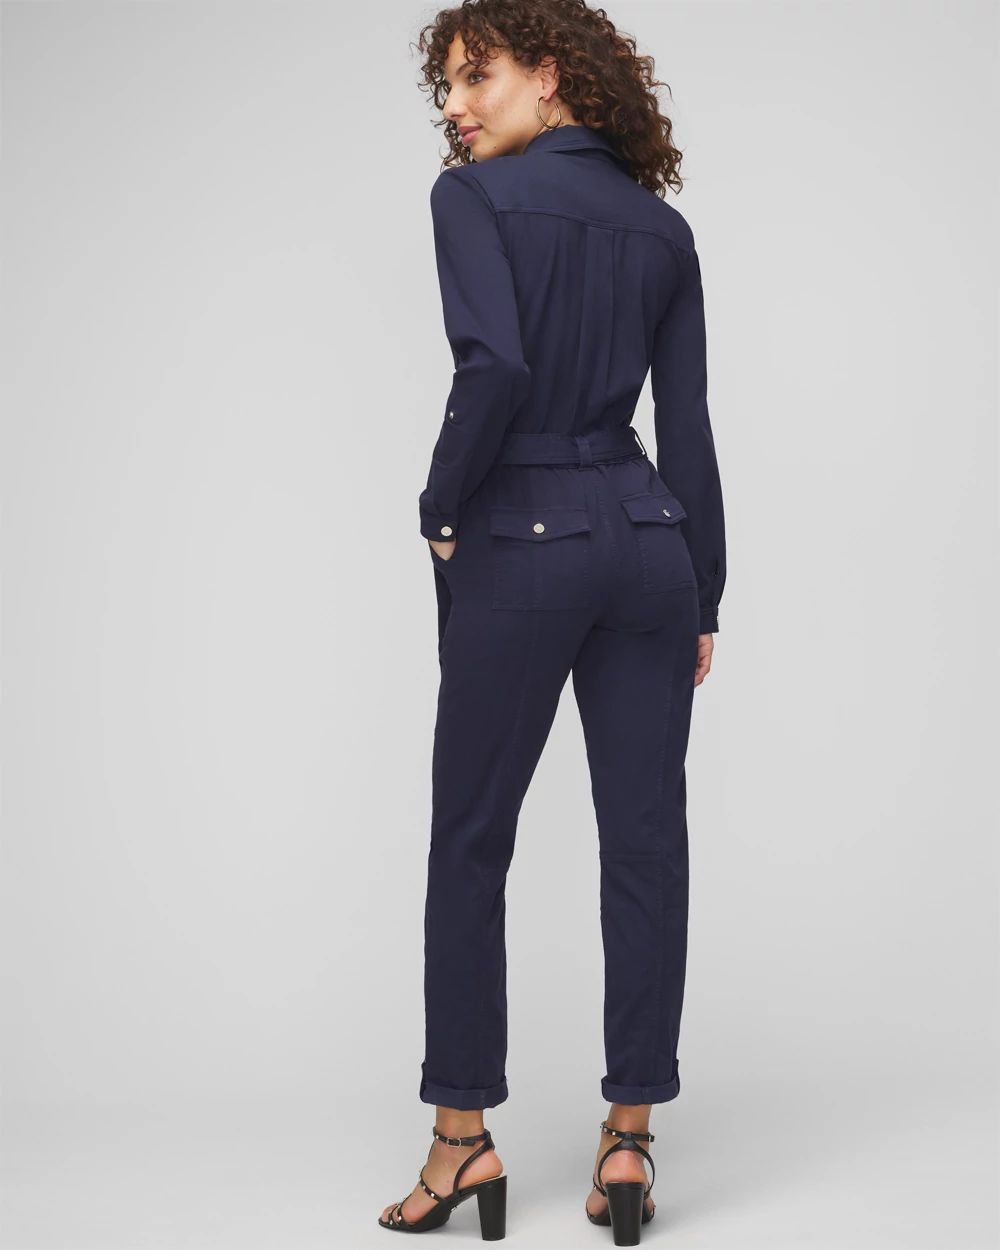 Long Sleeve Utility Jumpsuit click to view larger image.